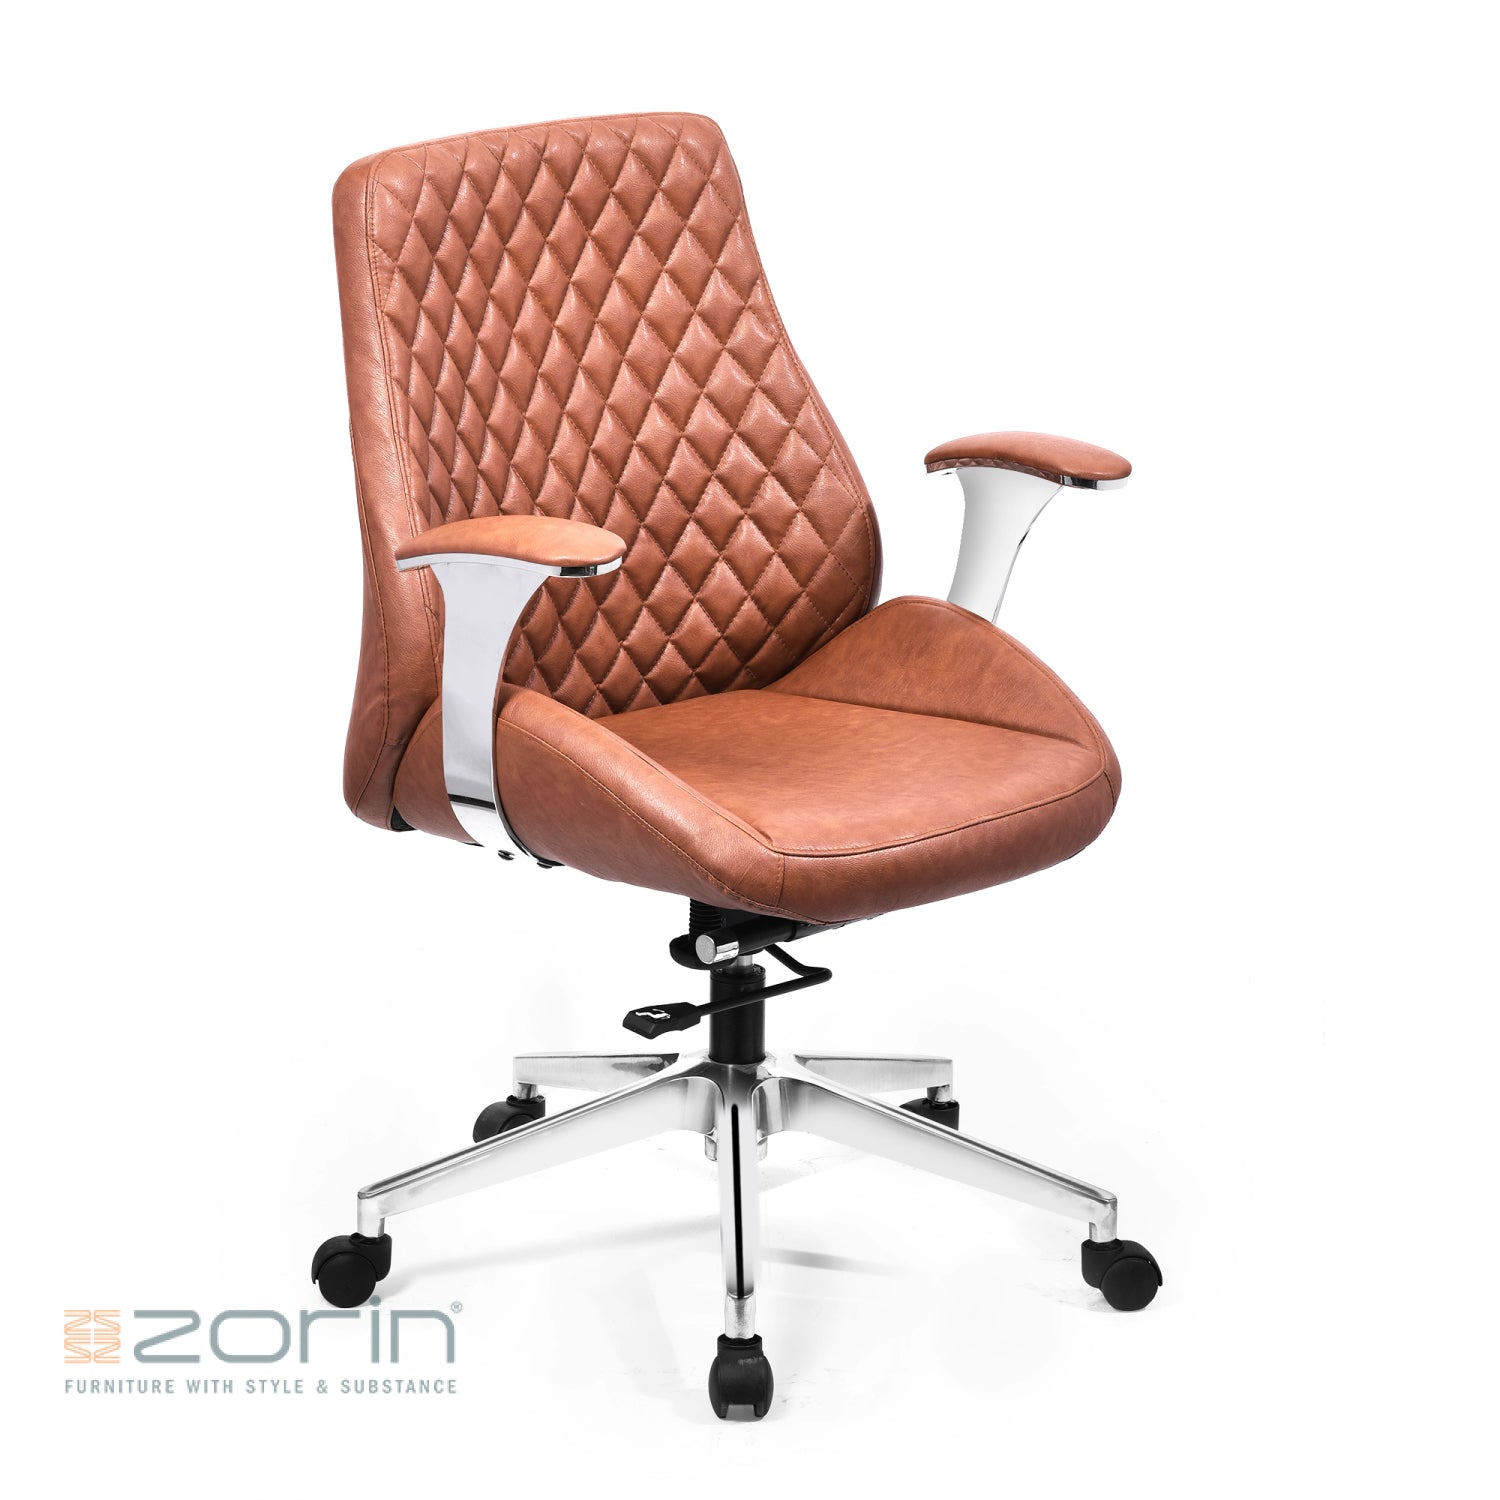 ZFB1004 Medium Back Chair by Zorin in Tan Color Zorin